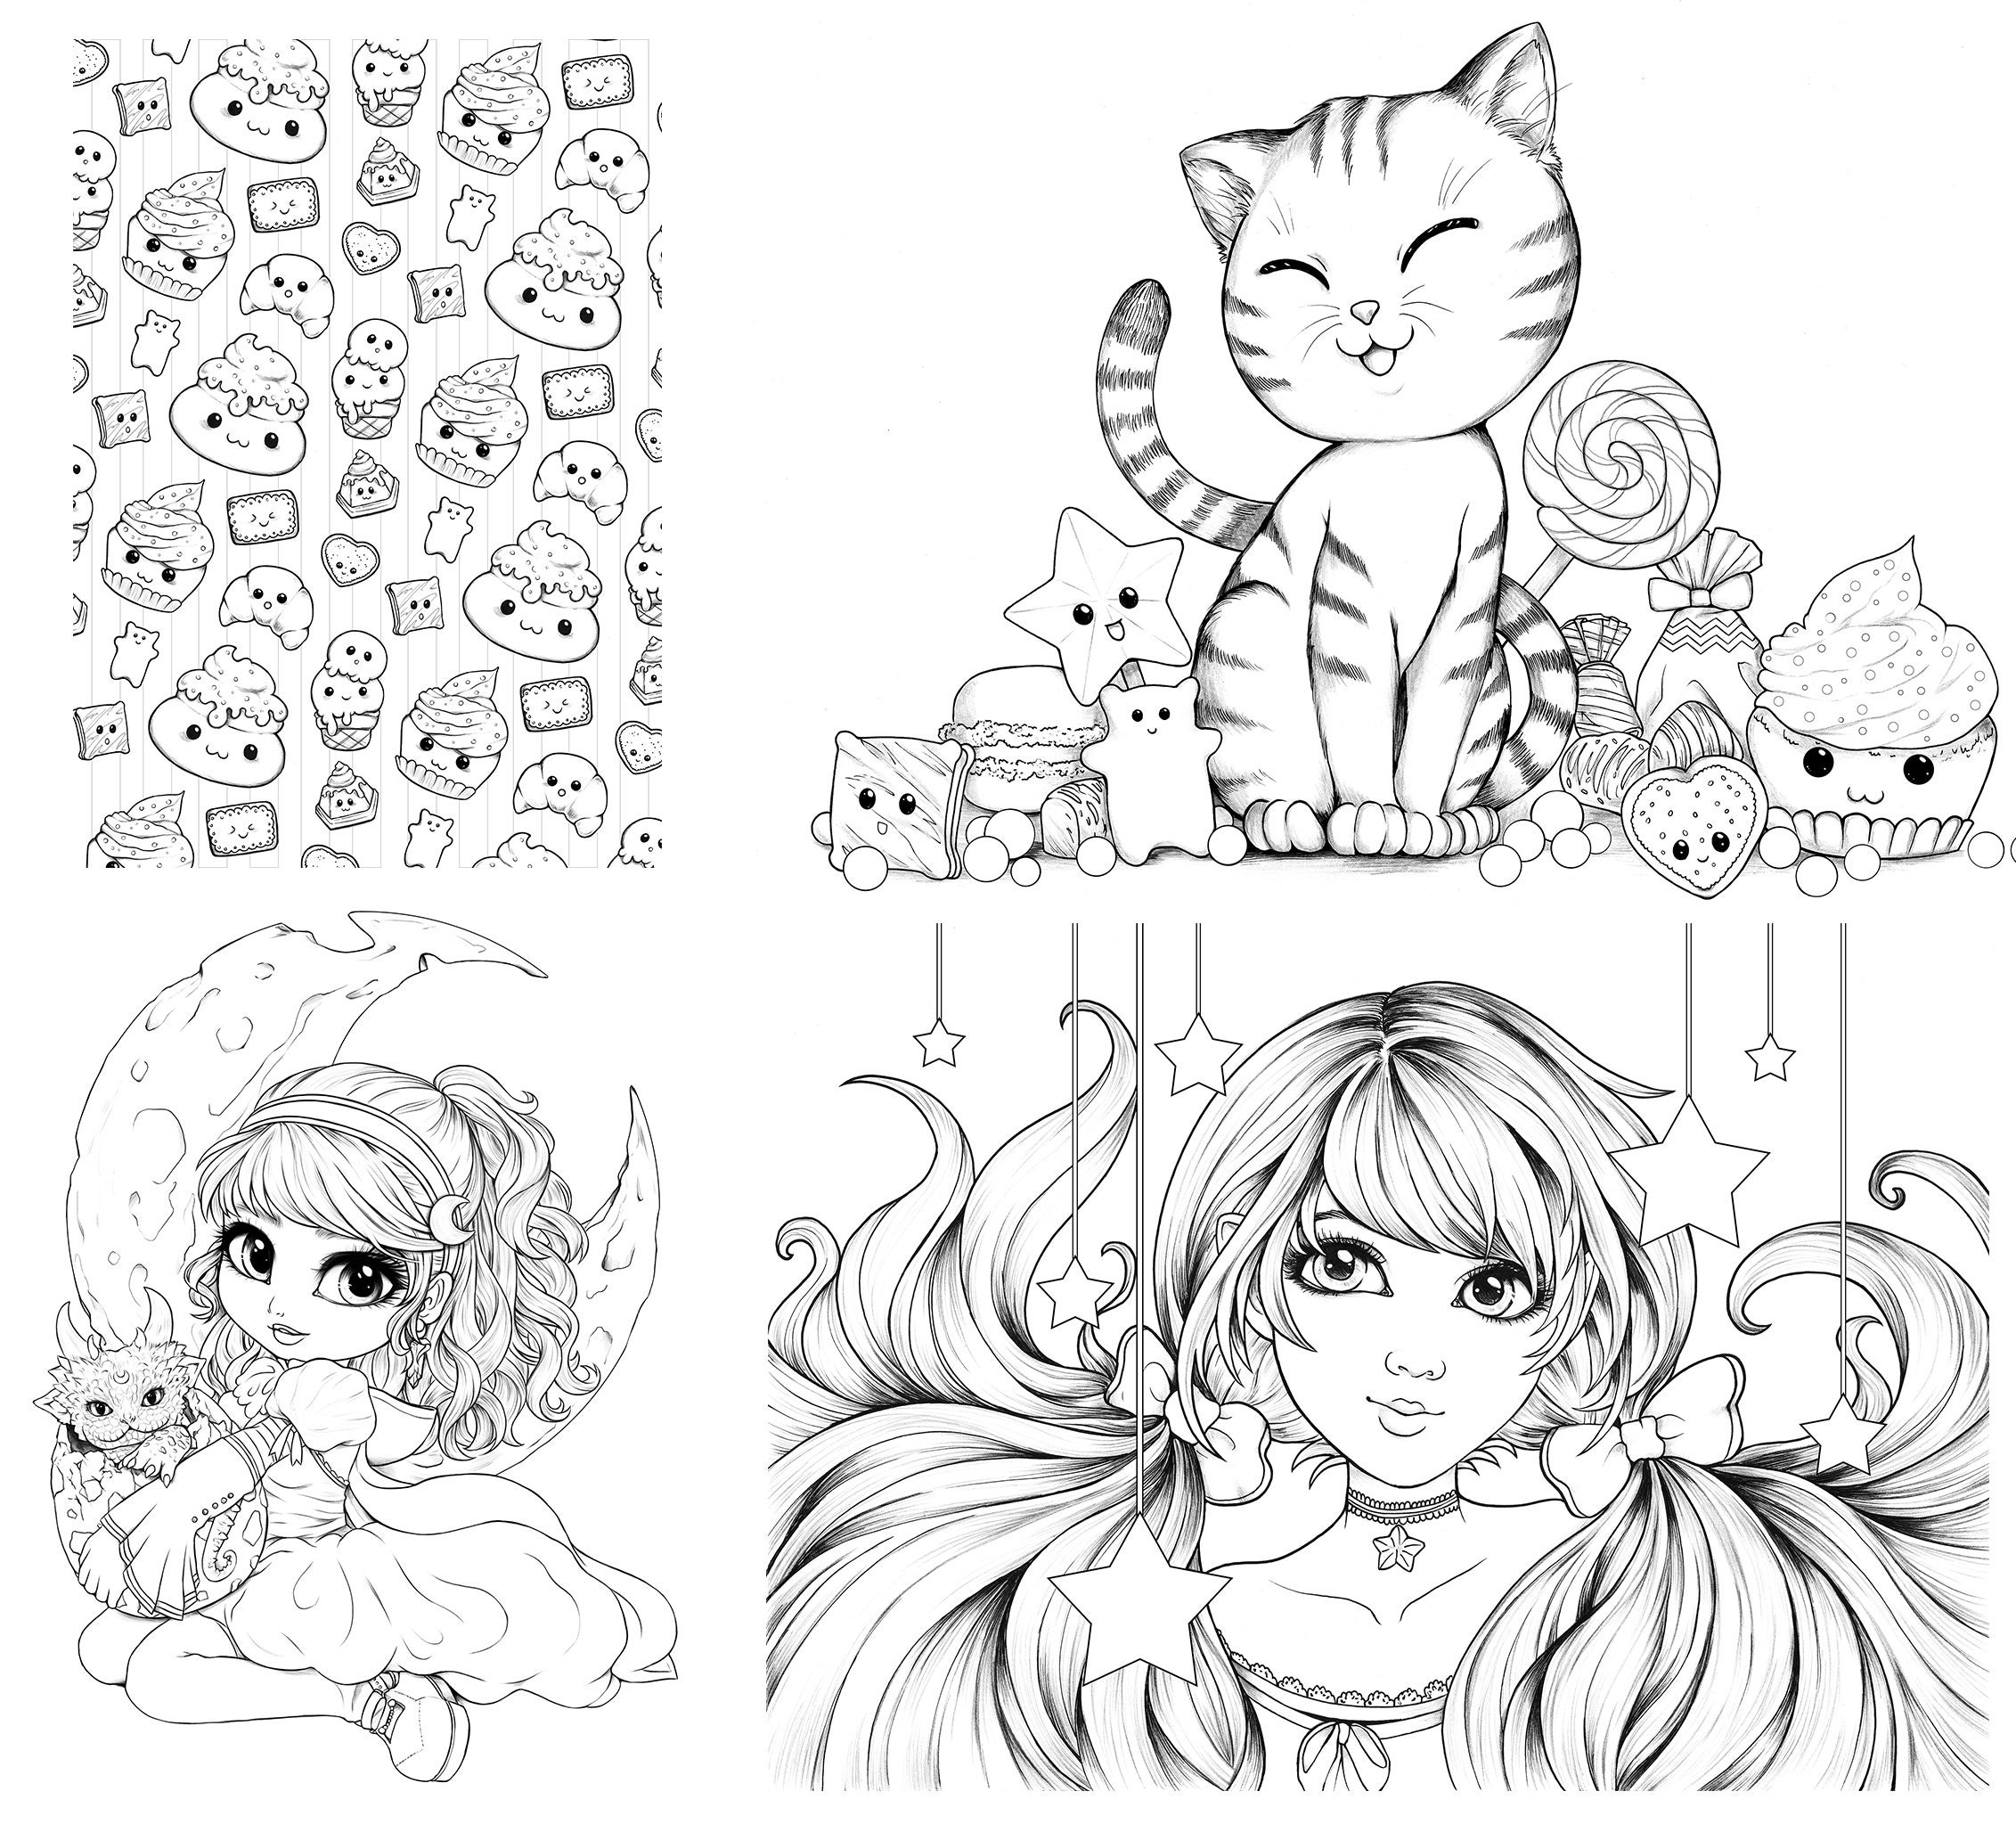 Every day is Halloween  Dessin animaux mignons, Dessin kawaii animaux,  Dessins mignons